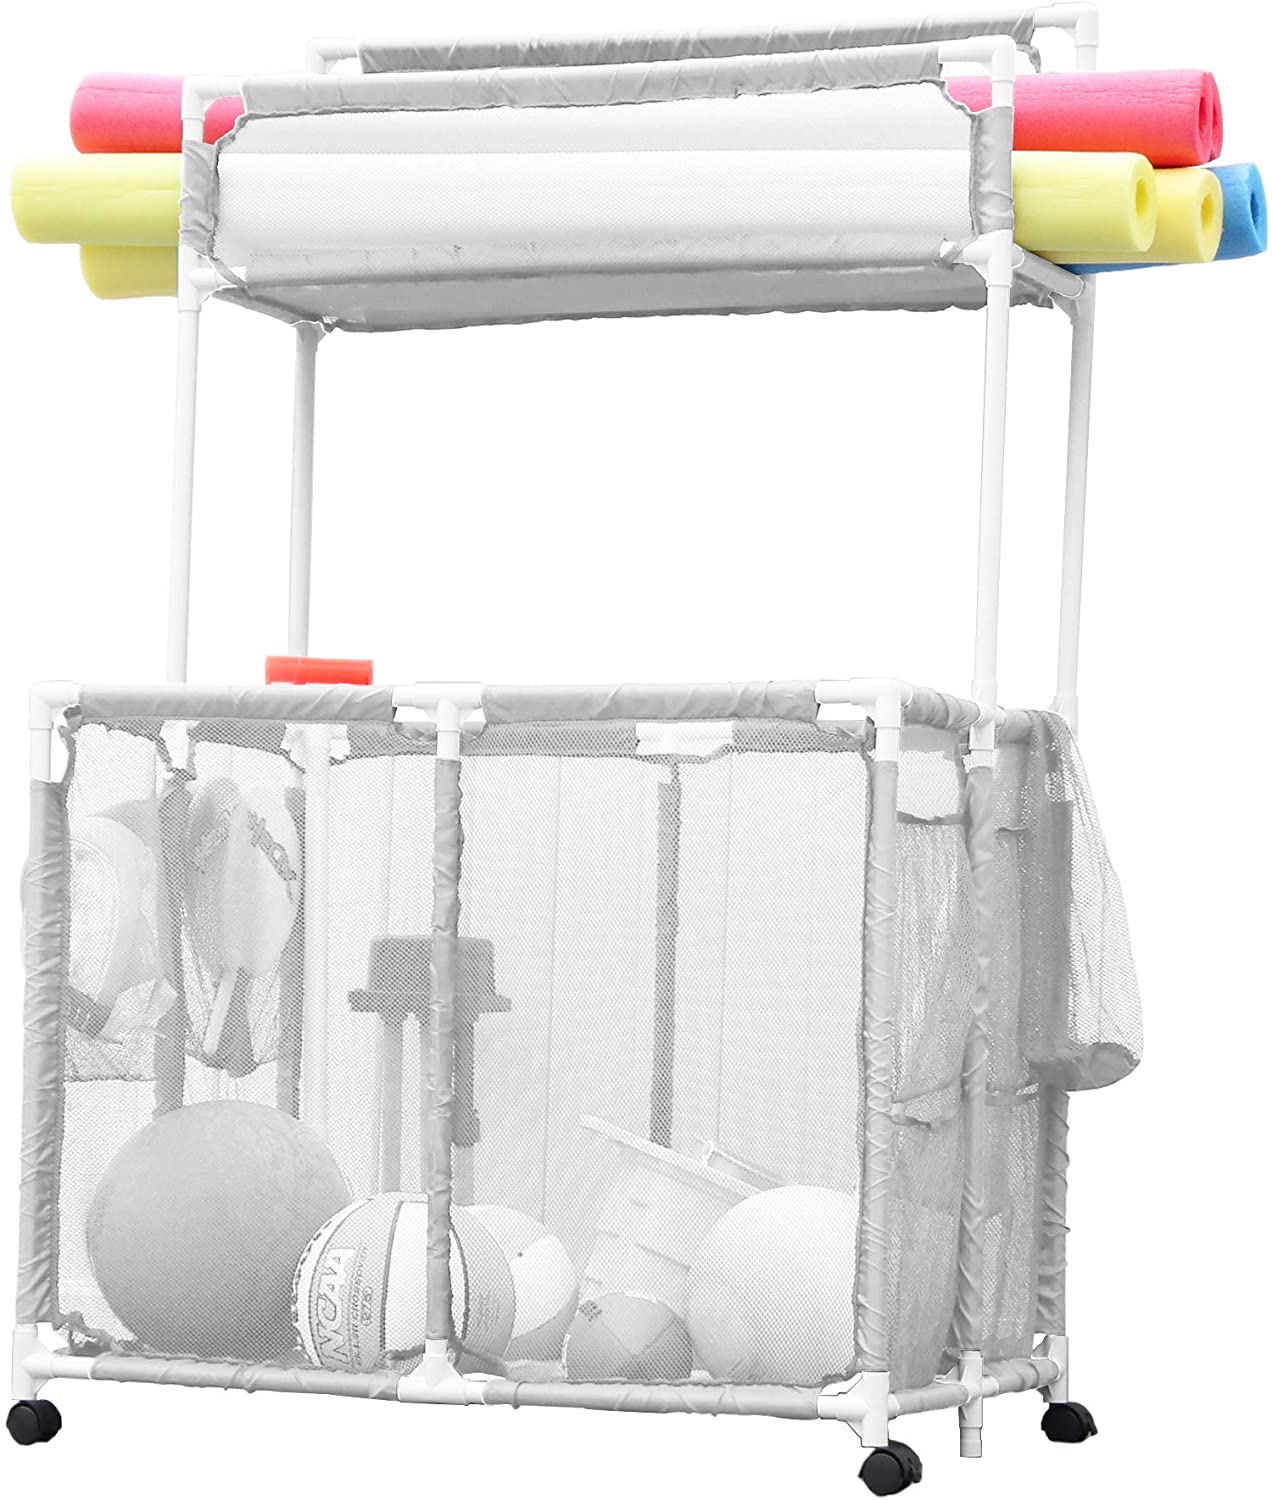 Photo 1 of Essentially Yours Pool Noodles Holder Toys Floats Balls and Floats Equipment Mesh Rolling Double Decker Multi Use Storage Organizer Bin 37L x 24W x 55H XXL White MeshWhite PVC